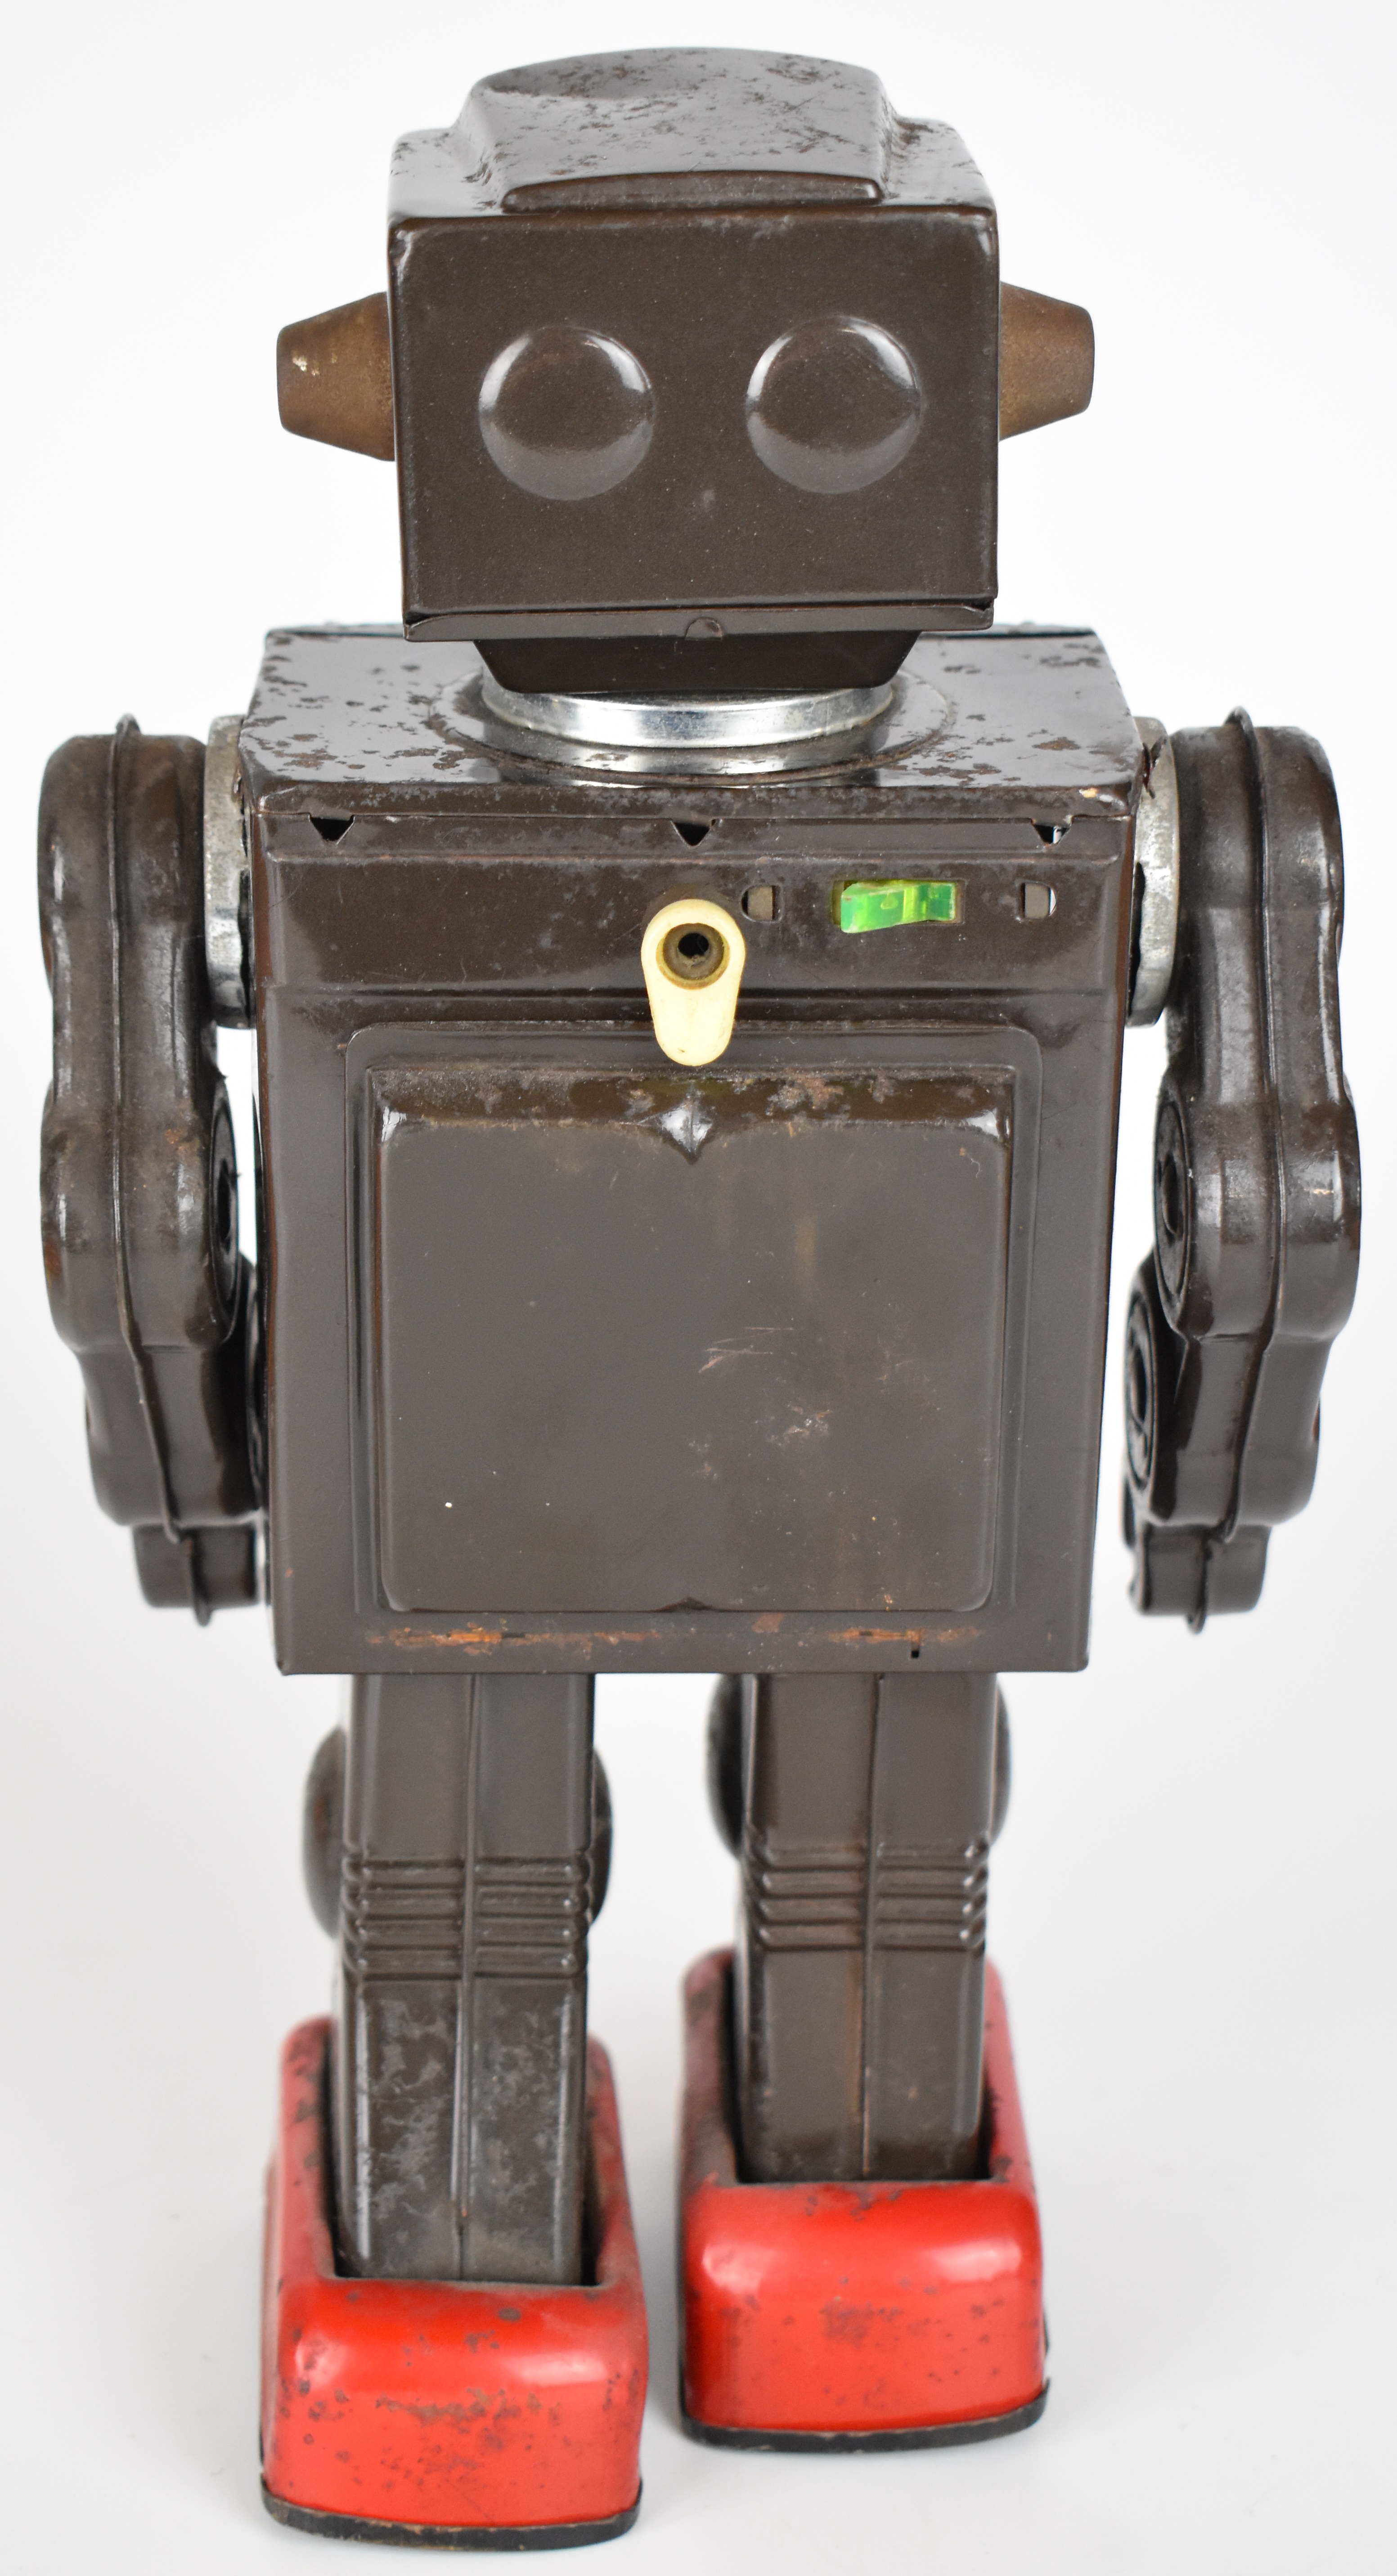 Japanese battery operated tinplate 'Attacking Martian' robot by Horikawa (SH Toys), height 28cm, - Image 4 of 11